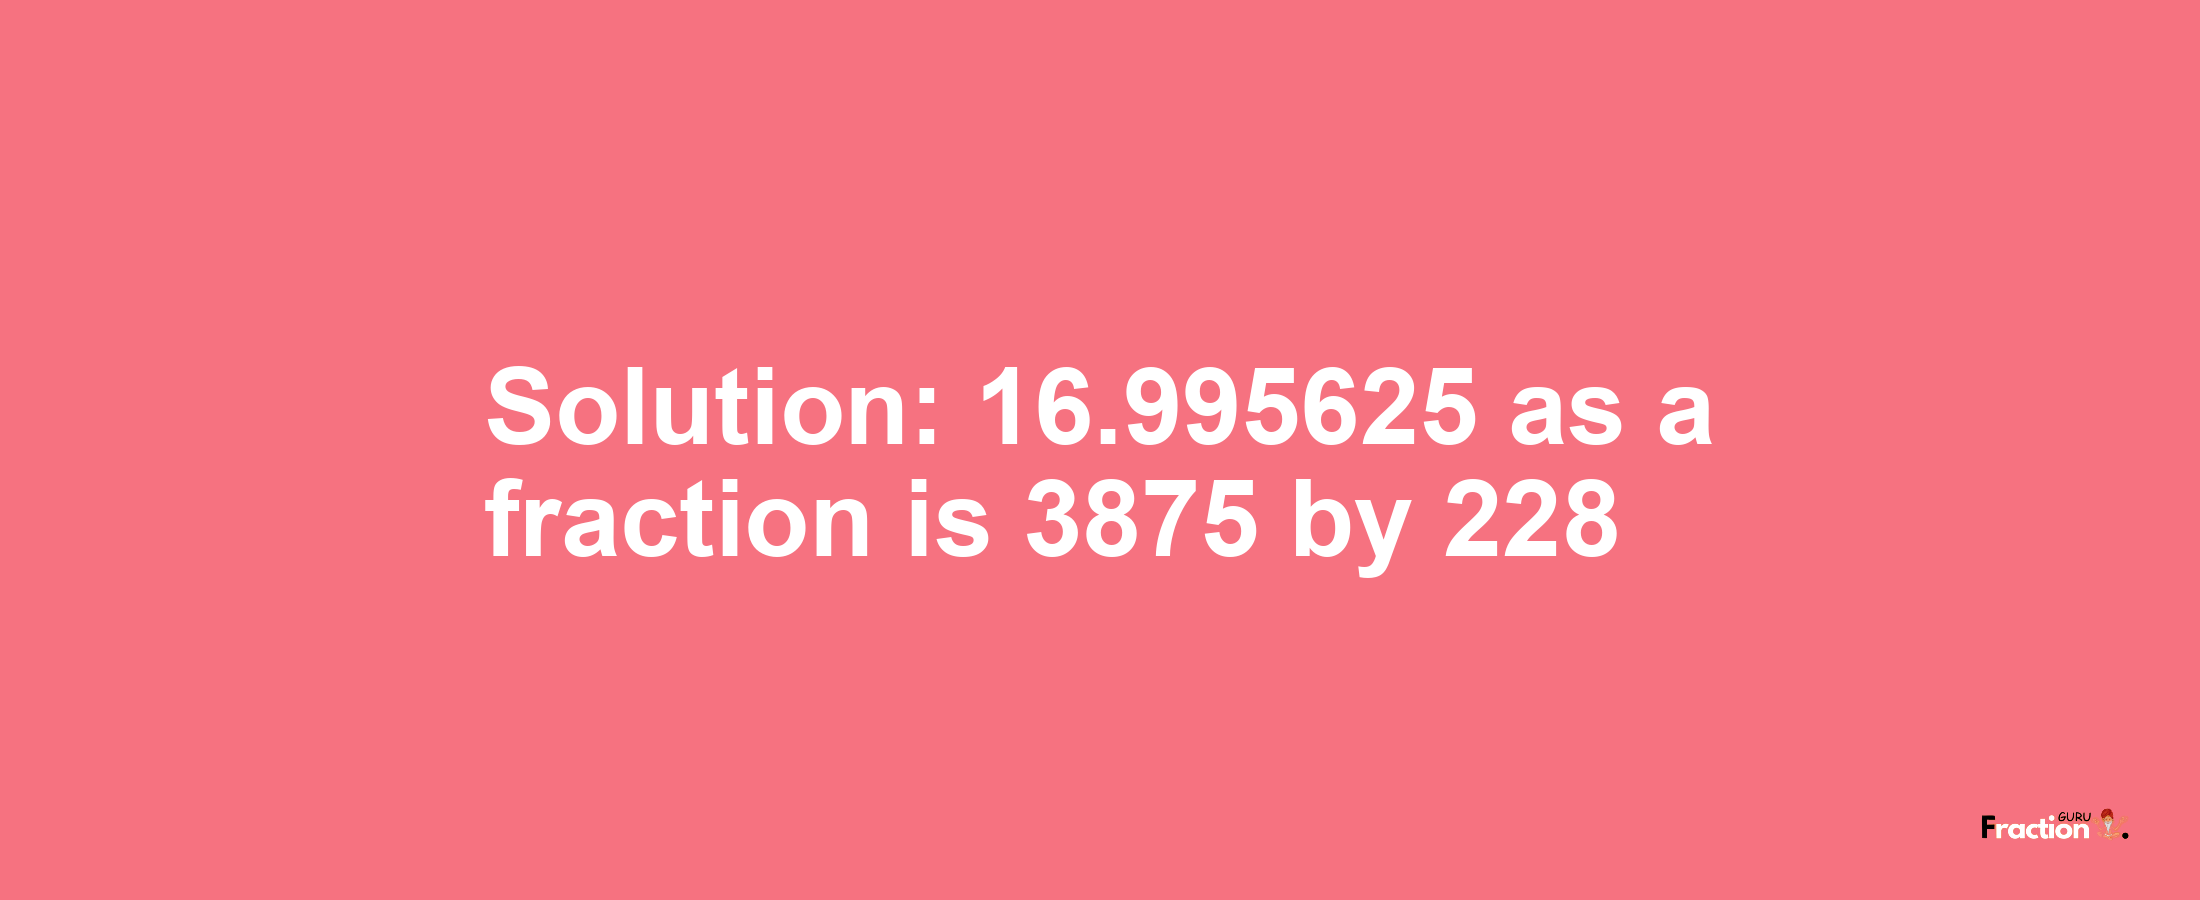 Solution:16.995625 as a fraction is 3875/228